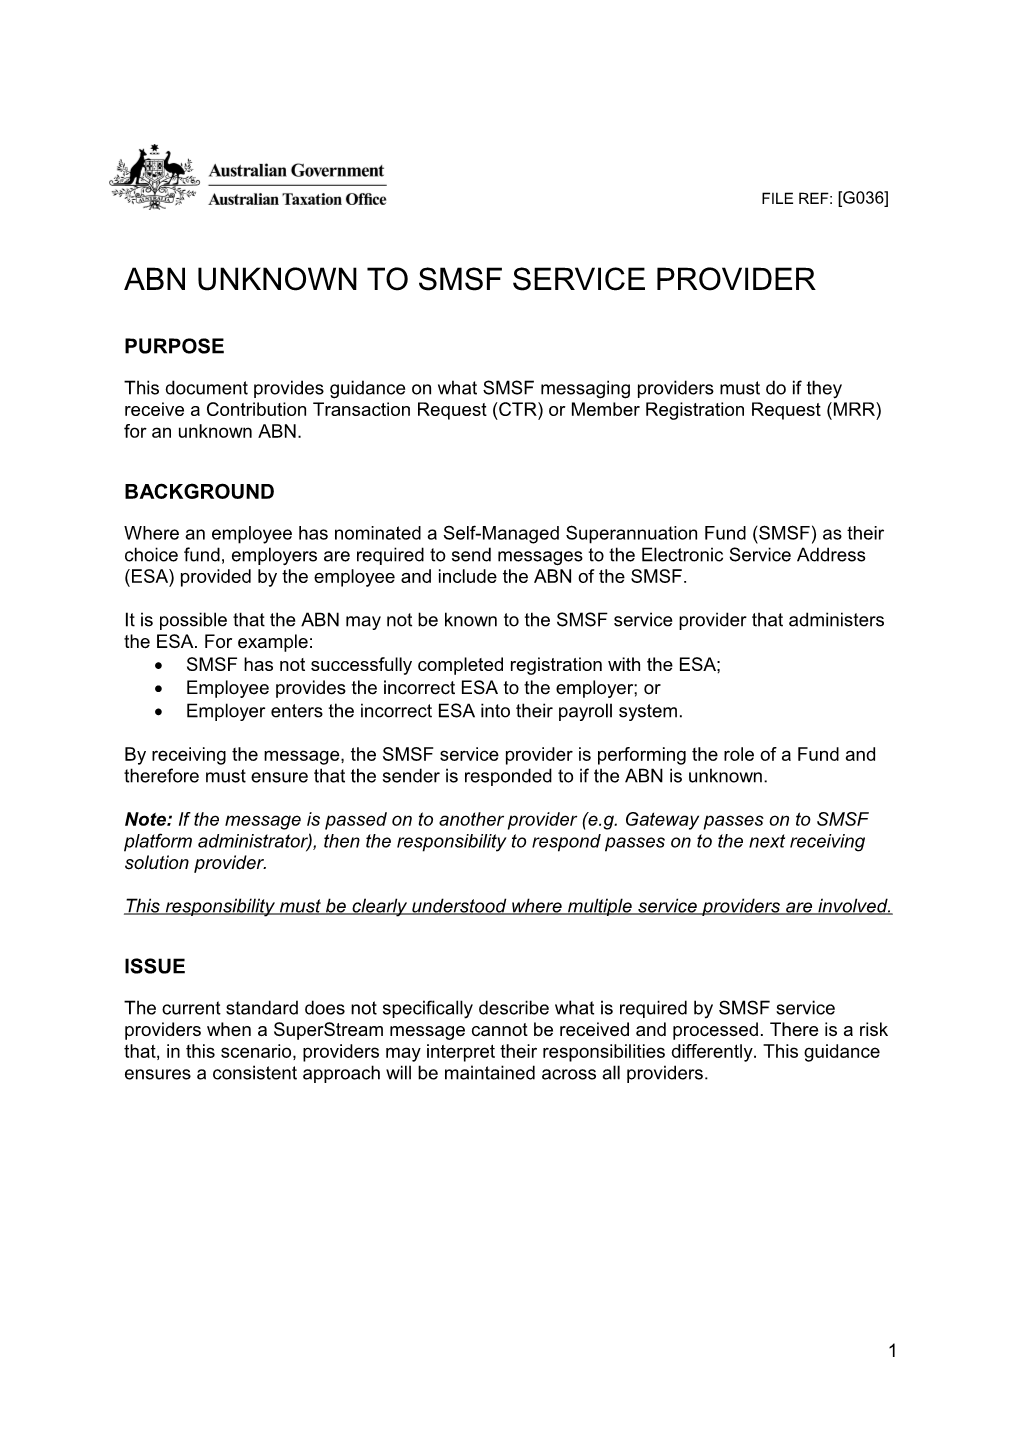 ABN UNKNOWN to SMSF SERVICE PROVIDER